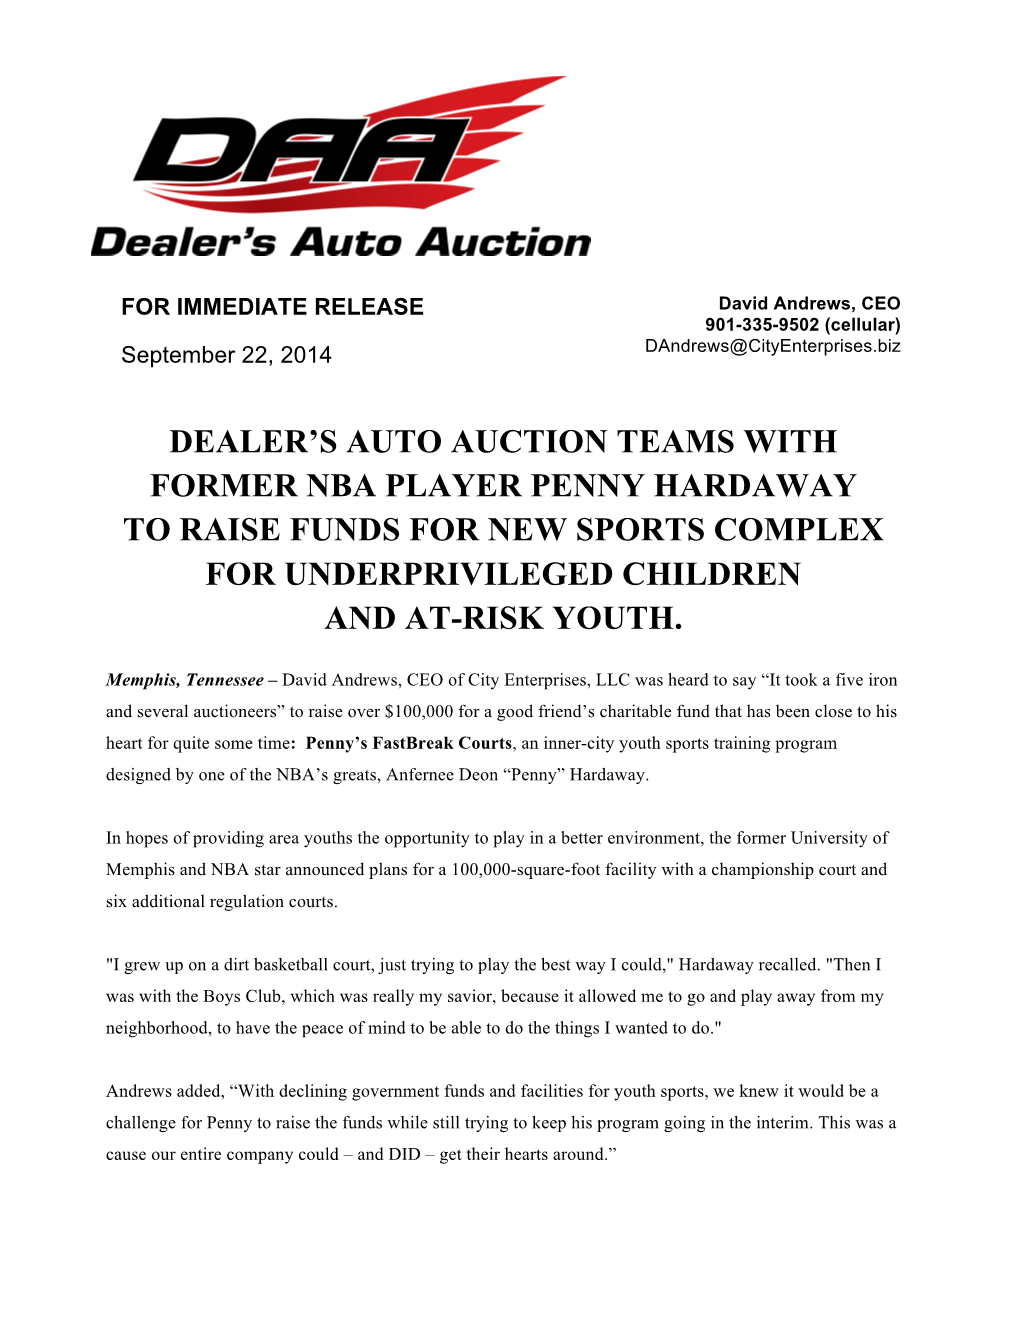 Dealer's Auto Auction Teams with Former Nba Player